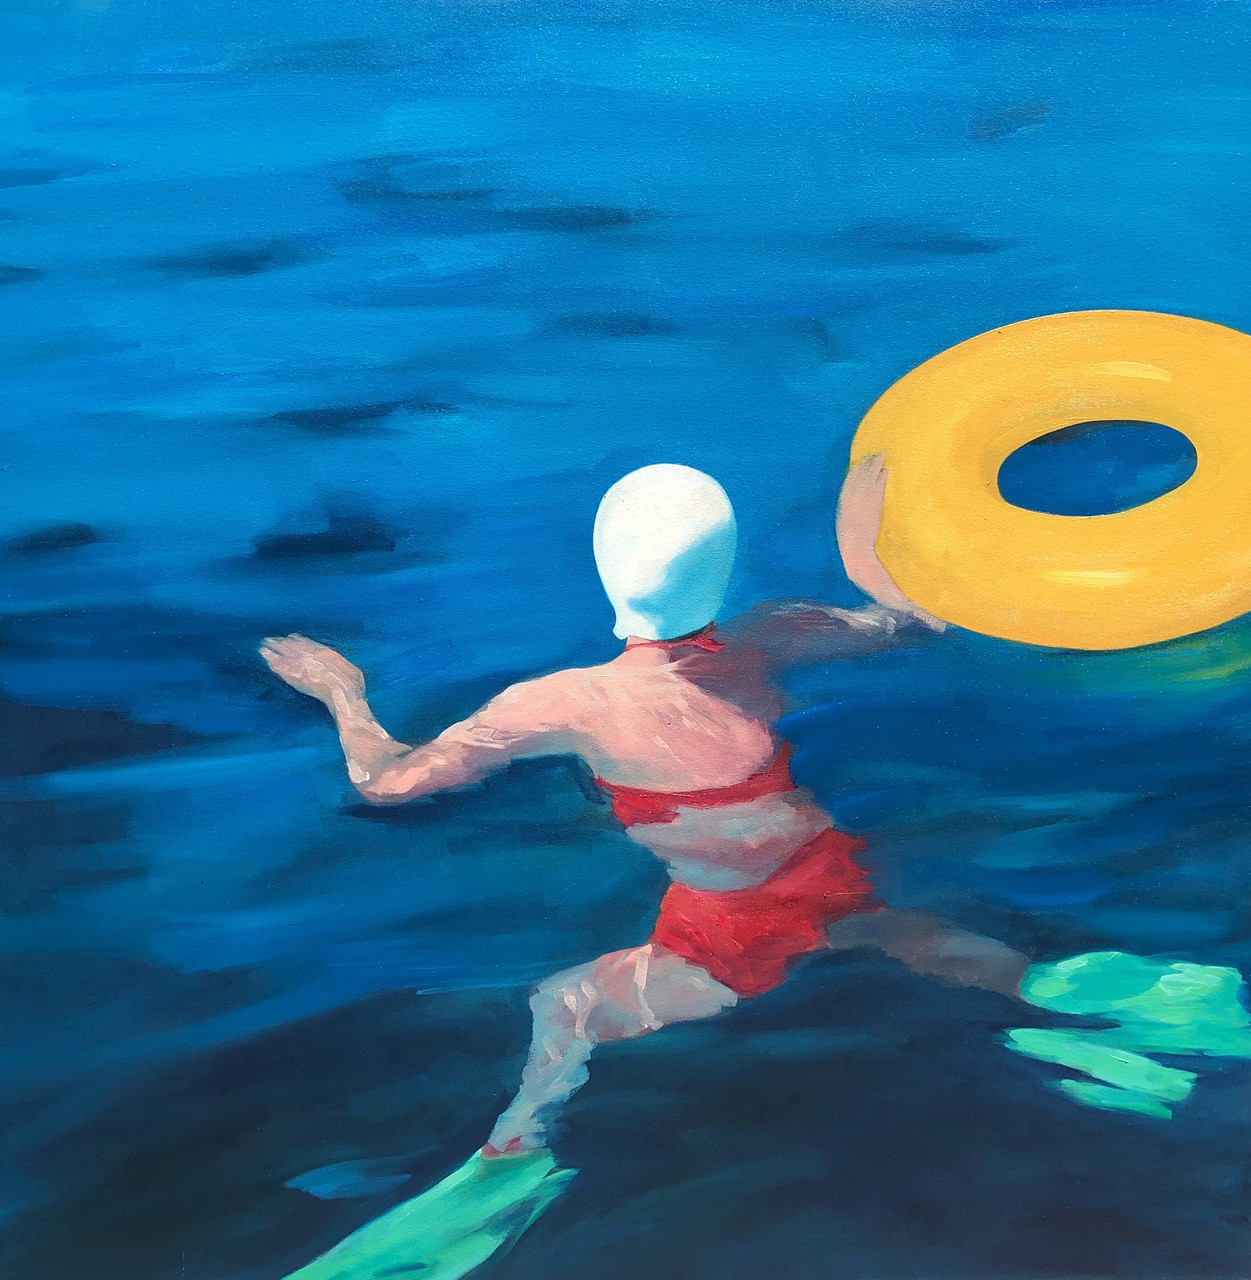 Tracey Sylvester Harris, Yellow Floaty, Oil on canvas, 40” x 40”, 2022